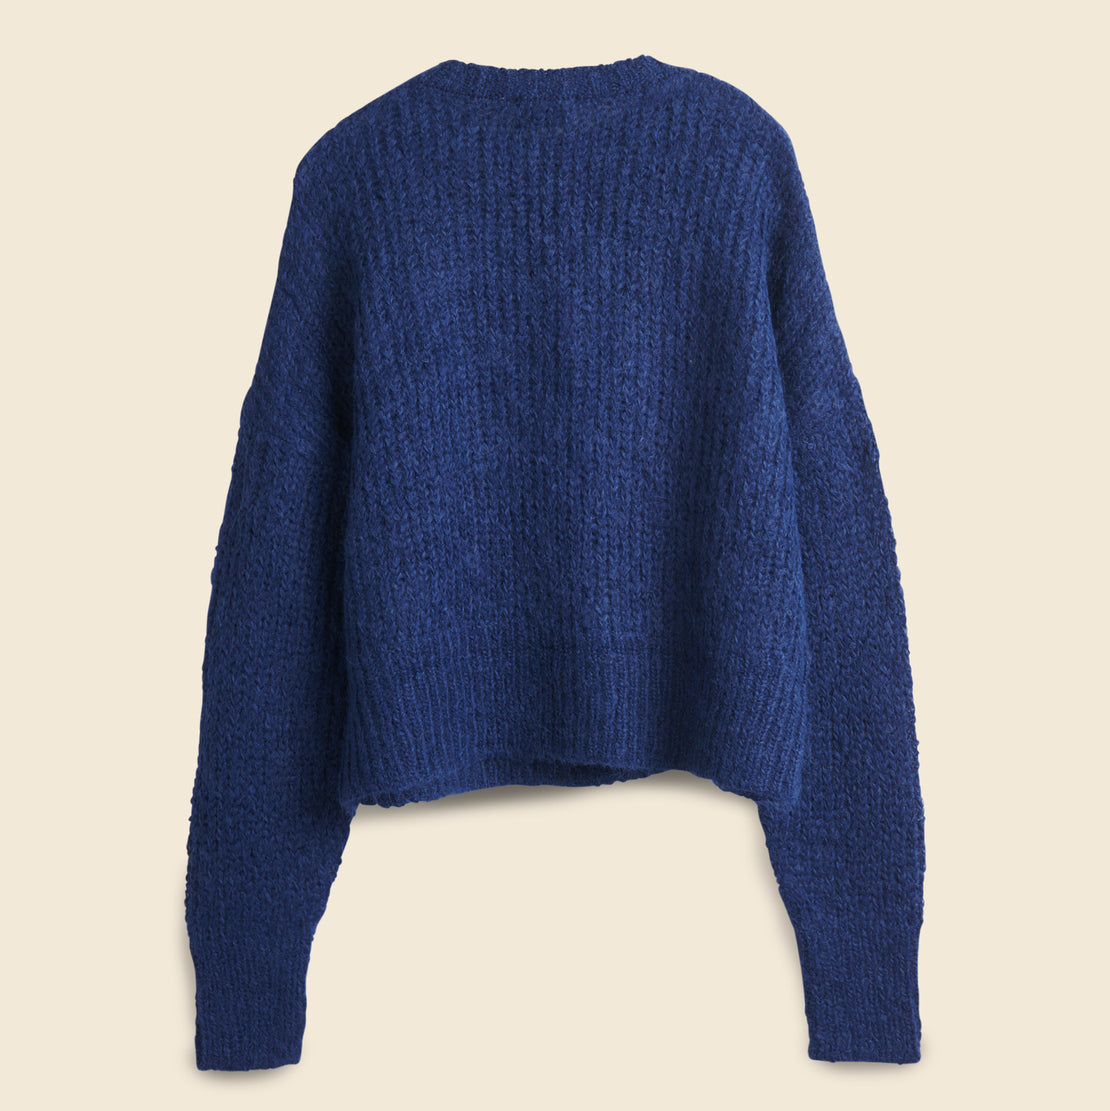 Bailey Top - Navy - Atelier Delphine - STAG Provisions - W - Tops - Sweater